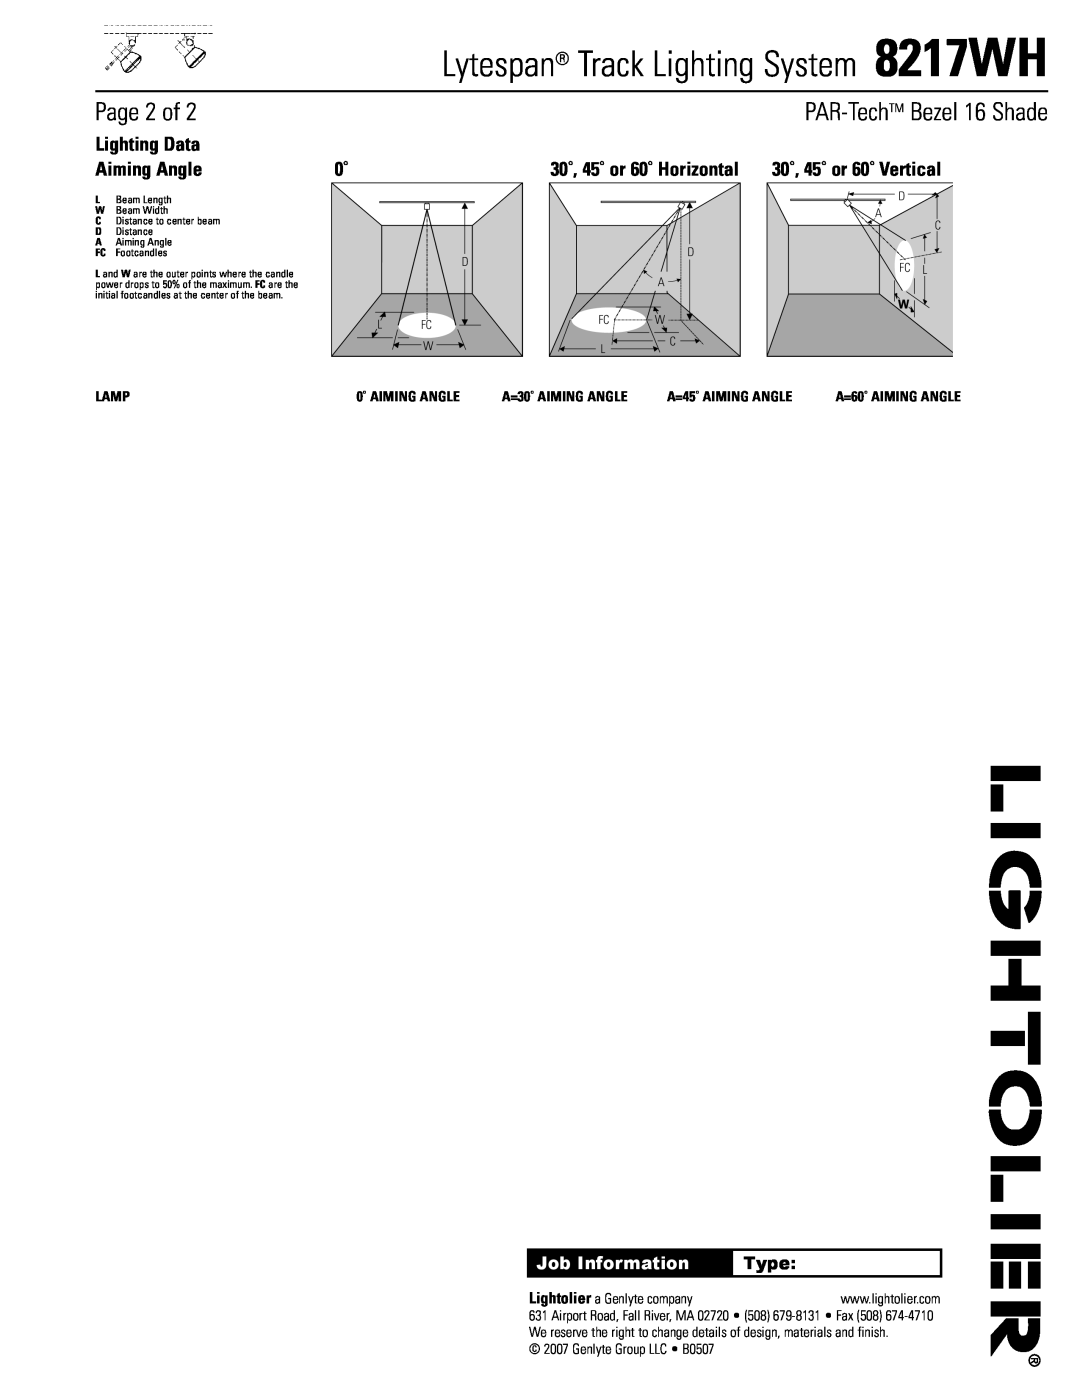 Lightolier 8217WH Page 2 of, PAR-TechTM Bezel 16 Shade, Lighting Data, Aiming Angle, 30˚, 45˚ or 60˚ Horizontal, Type 